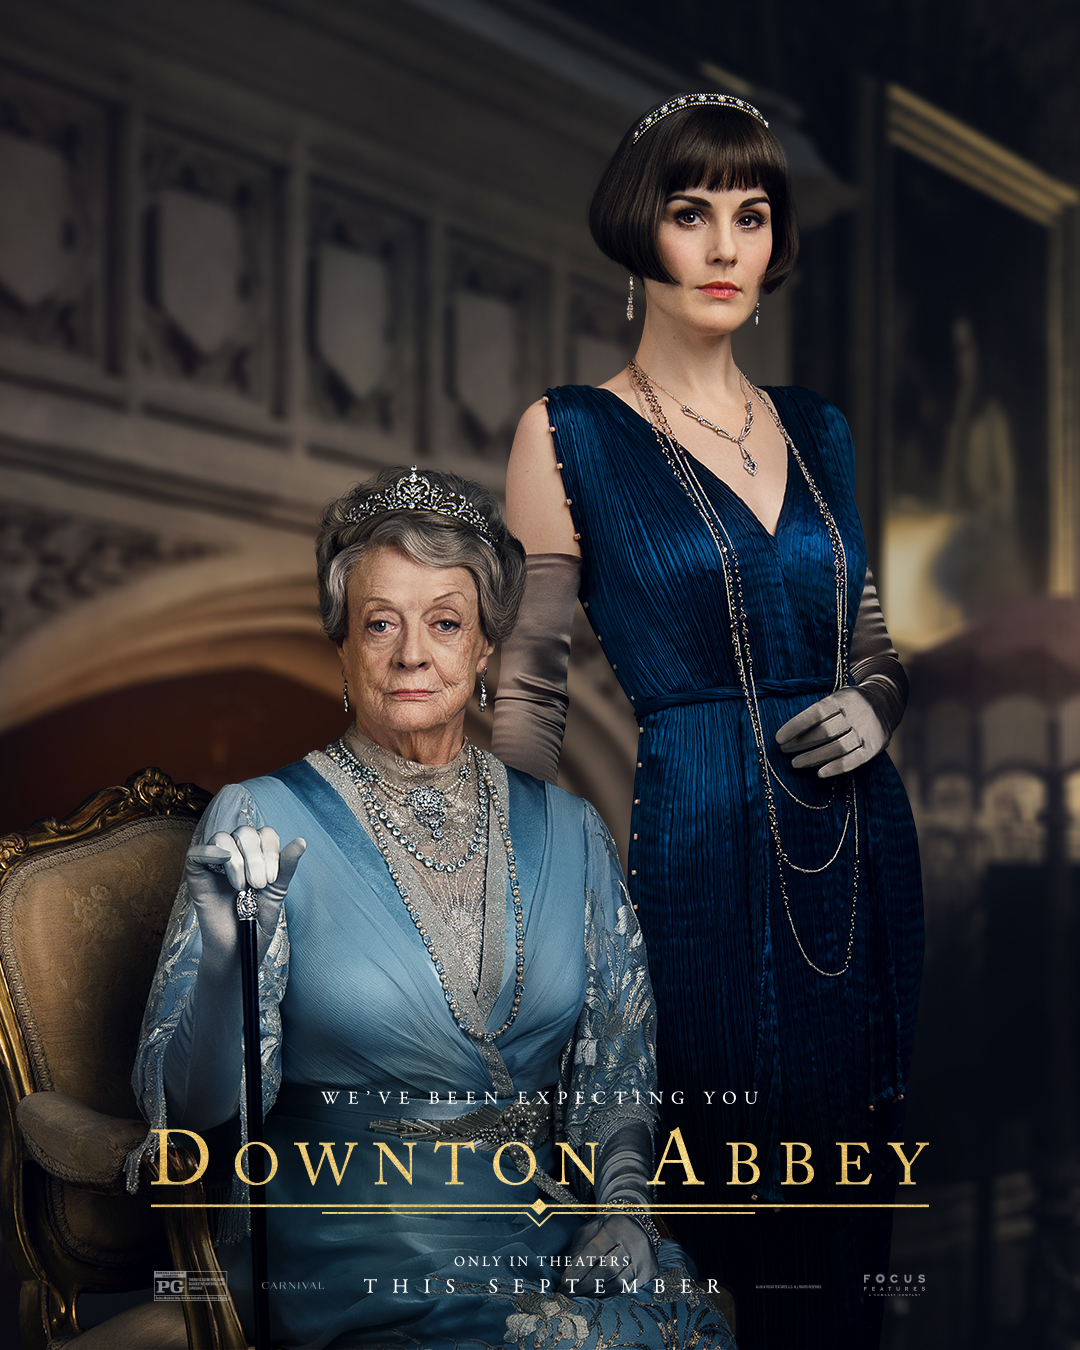 <p>In the film, Maggie Smith (who plays the Dowager Countess of Grantham) wore a light blue gown topped with a magnificent antique foliate tiara set with 16.5 carats of old-brilliant-cut diamonds. "The dowager's tiaras had a certain number of carats to give them the weight you would expect from the head of the household," costumer designer Anna Mary Scott Robbins told <a href="https://www.tatler.com/article/anna-robbins-downton-abbey-costume-designer-interview">Tatler</a>. Lady Mary (<a href="https://www.wonderwall.com/celebrity/profiles/overview/michelle-dockery-1488.article">Michelle Dockery</a>) accessorized her Prussian blue gown seen here with an incredible yet very different diamond headpiece. "I try to match the tiaras with the color, delicacy or boldness of the material or the design of a dress," the costume designer explained to Tatler. "Lady Mary's tiaras were quite art-deco with slightly more angular-cut diamonds."</p>